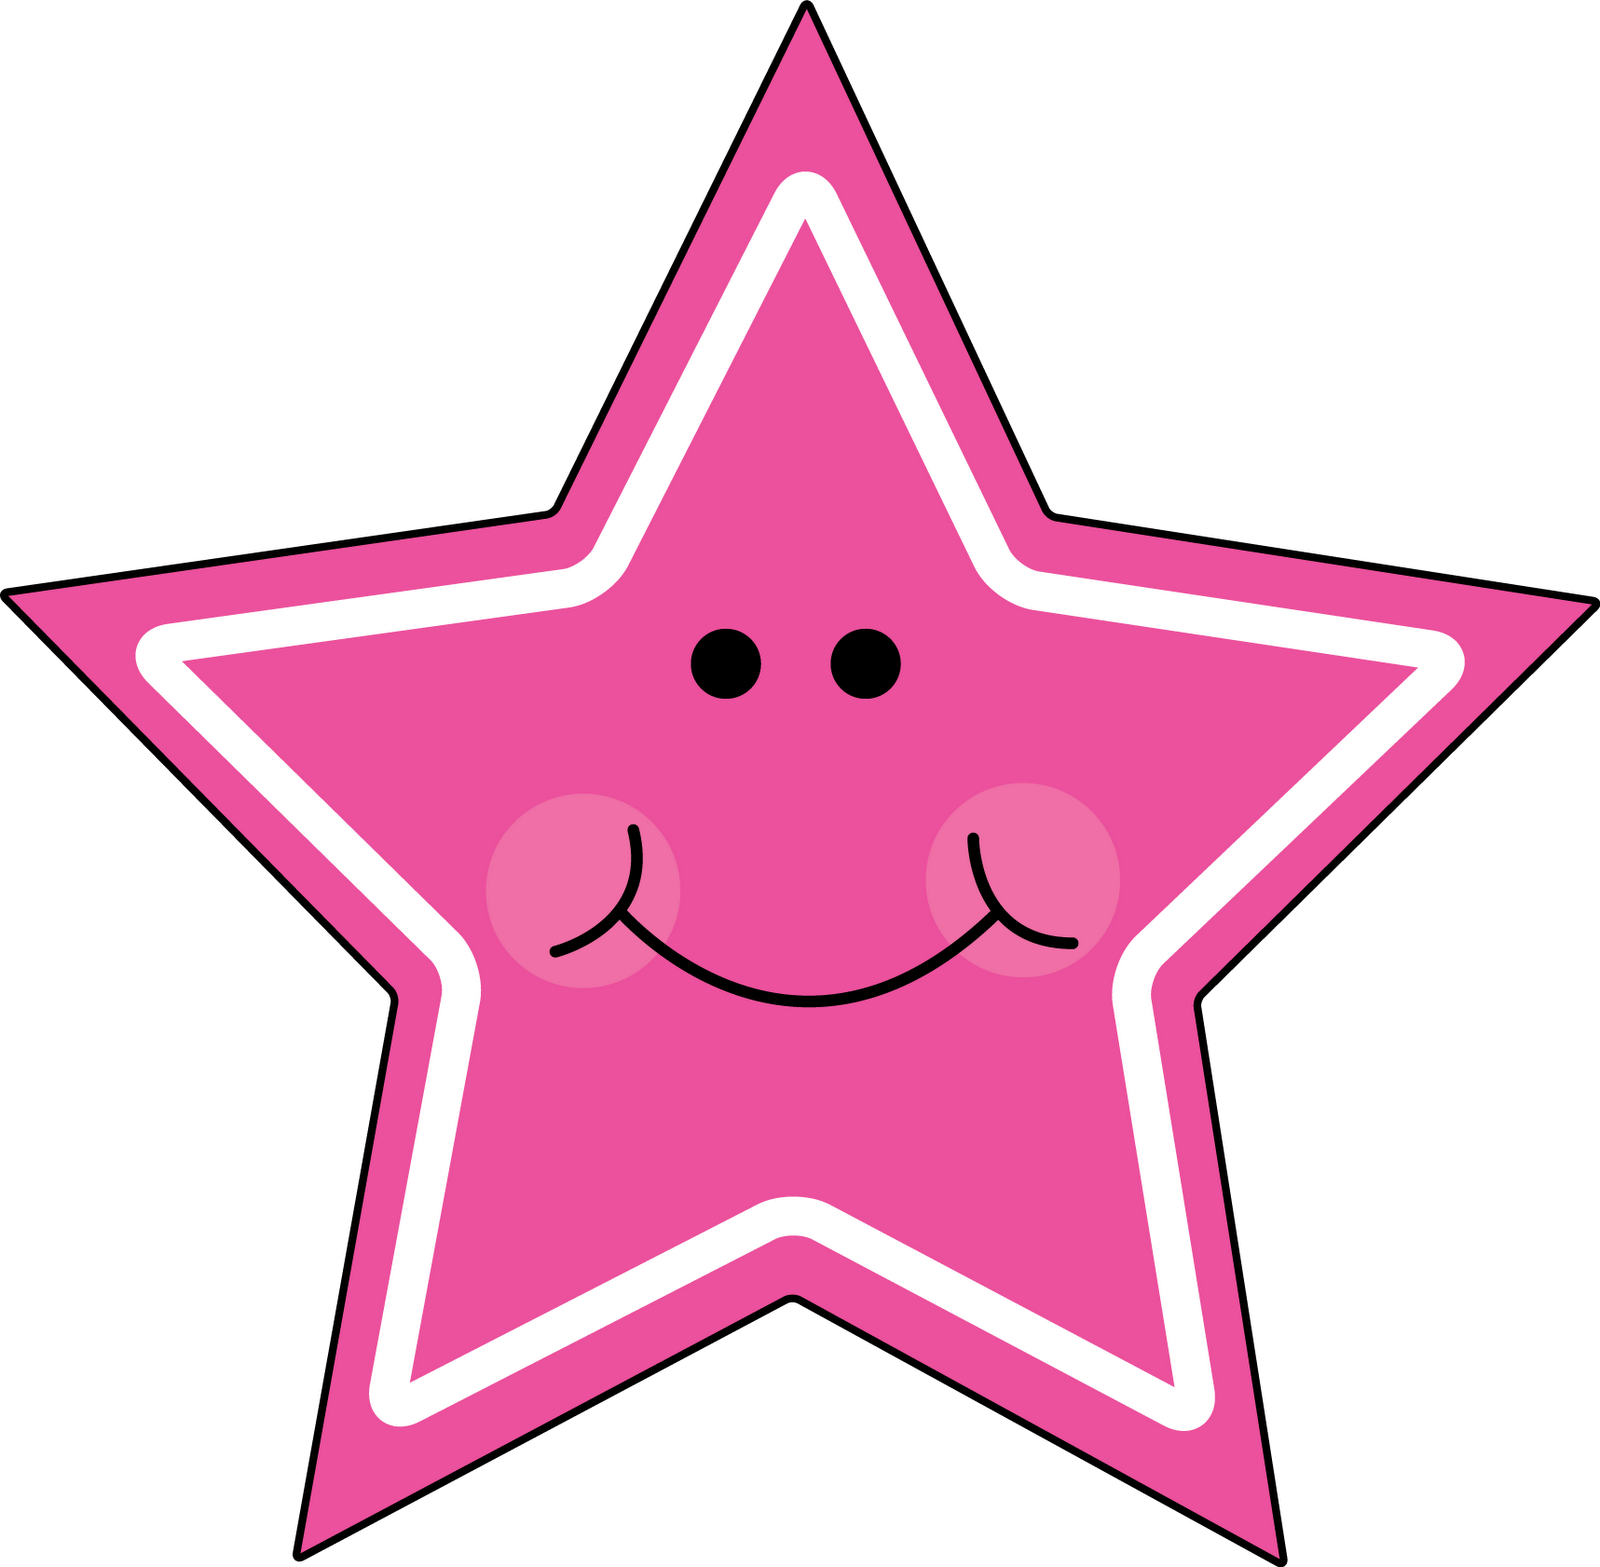 Free clipart of stars shapes